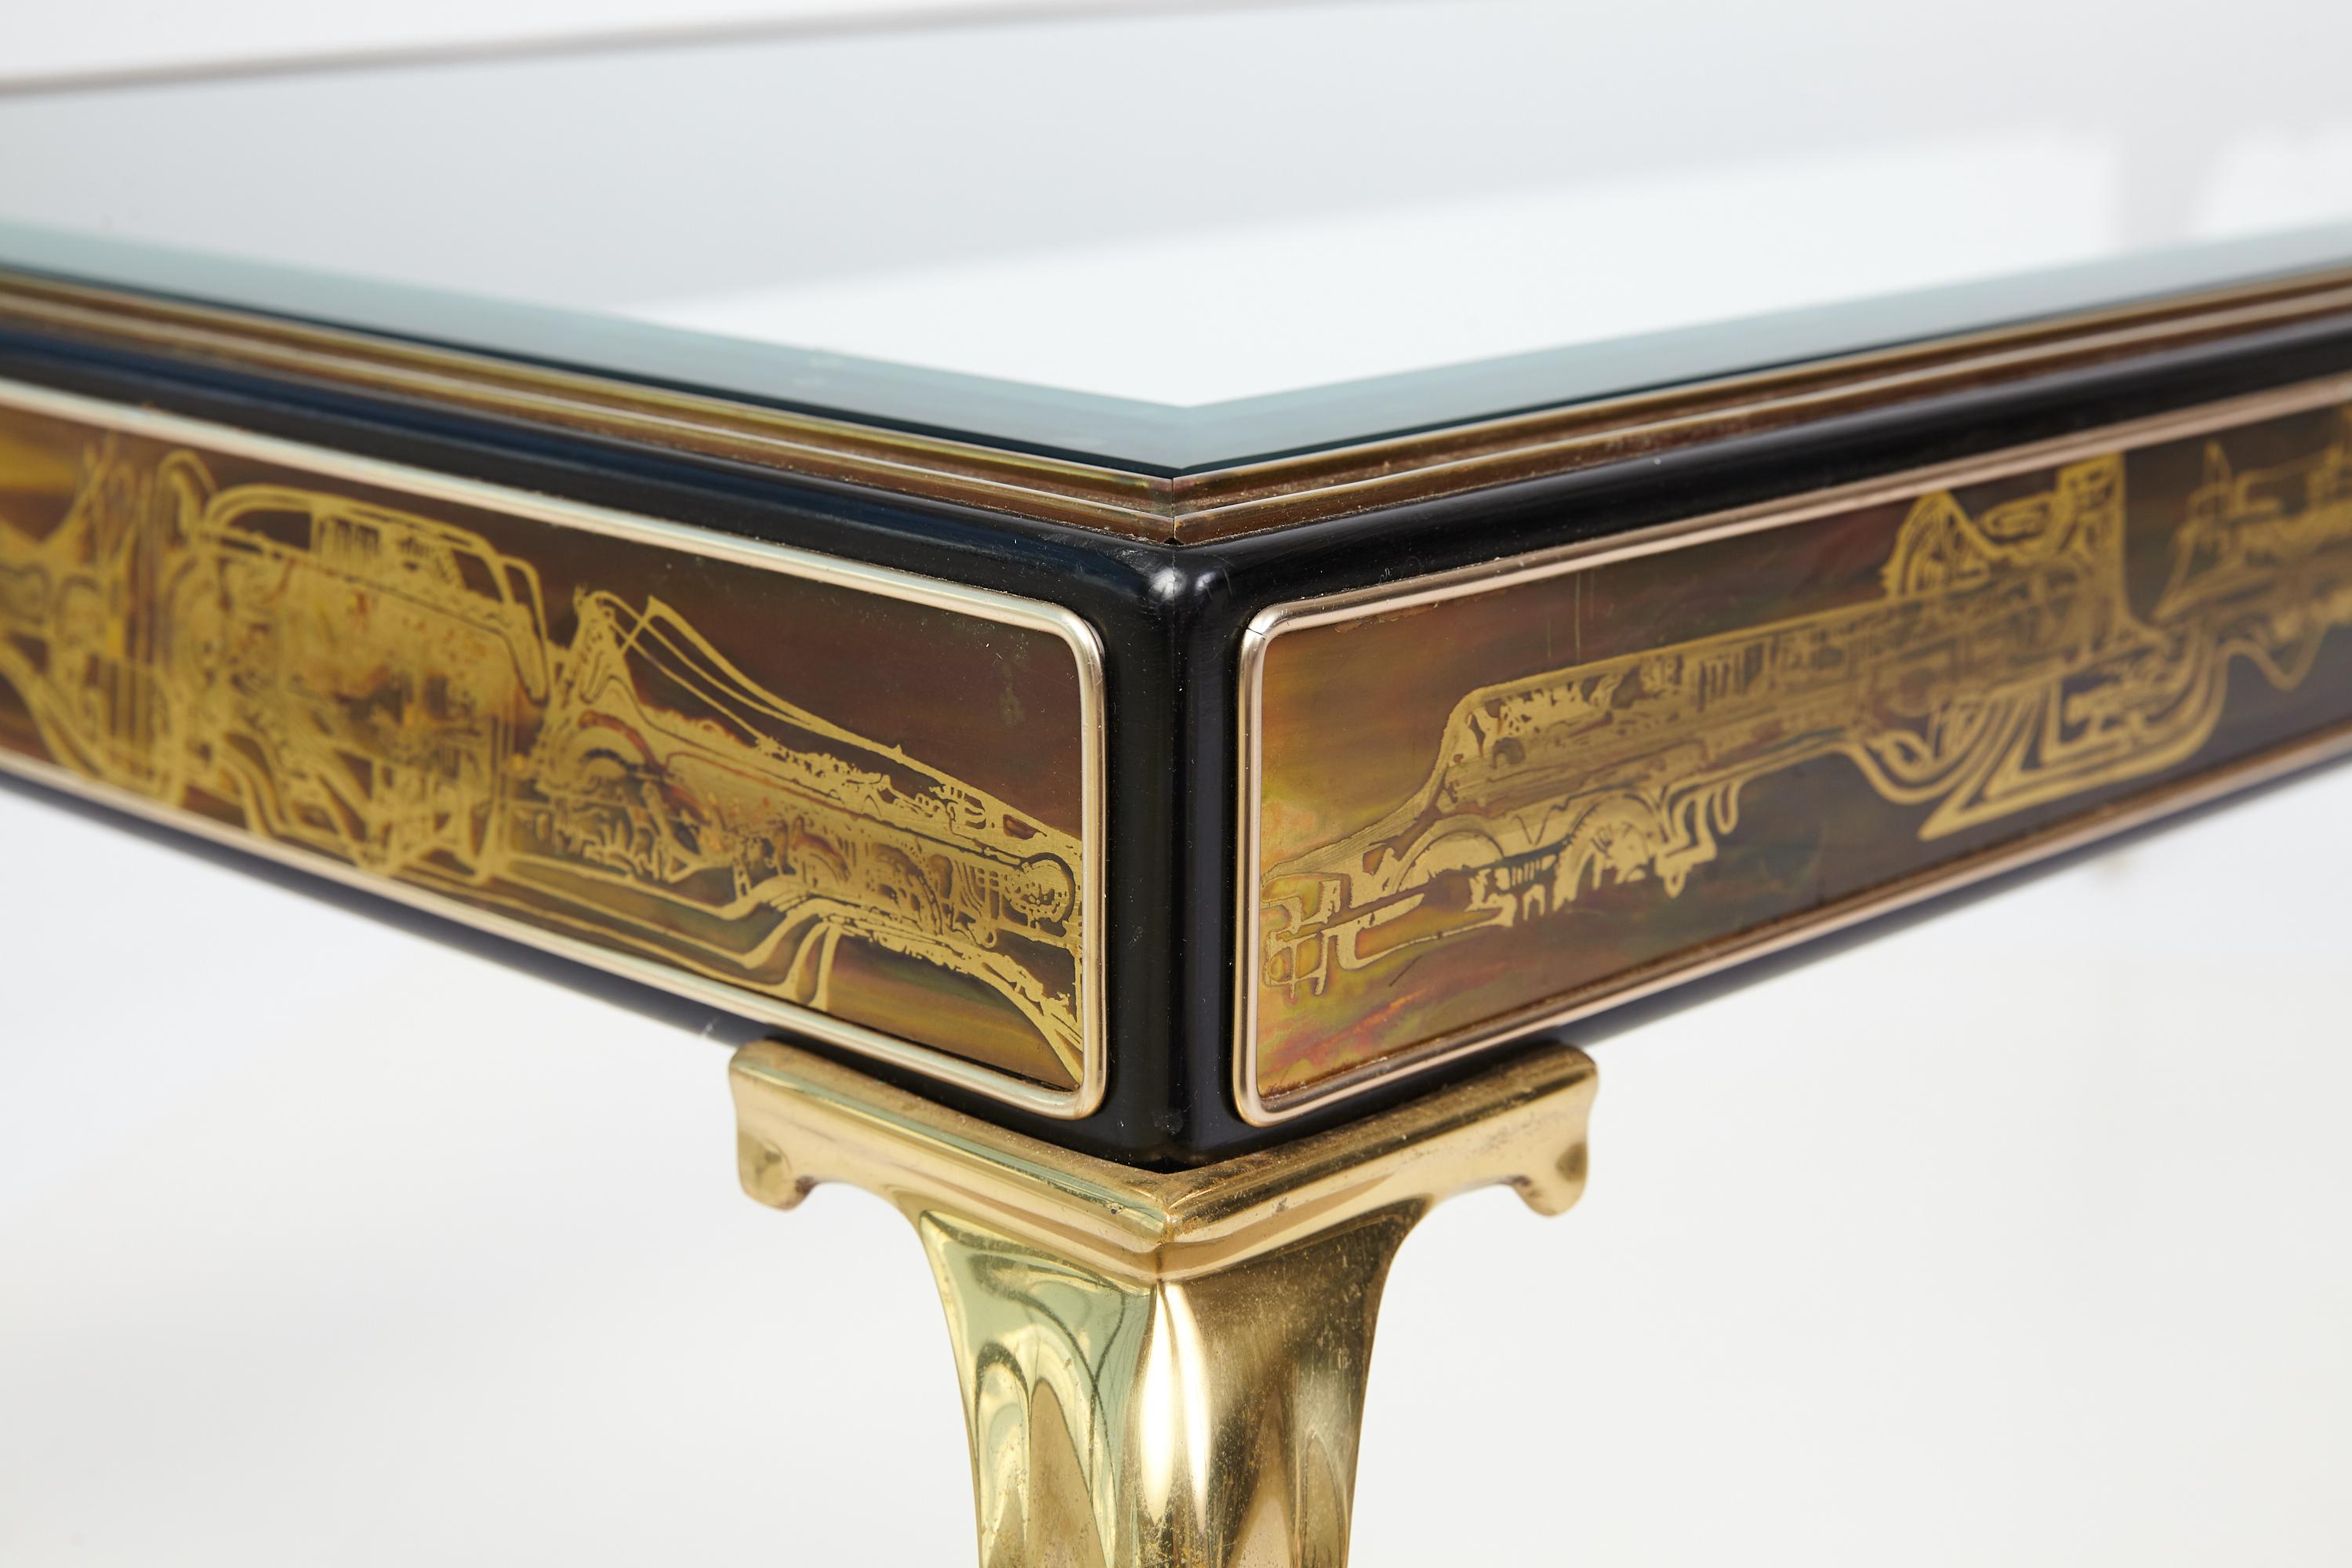 Glass top coffee / cocktail table with stylized cabriolet legs and side panels with acid etched design. A Mastercraft table designed by Bernhard Rohne with his signature decorative application.